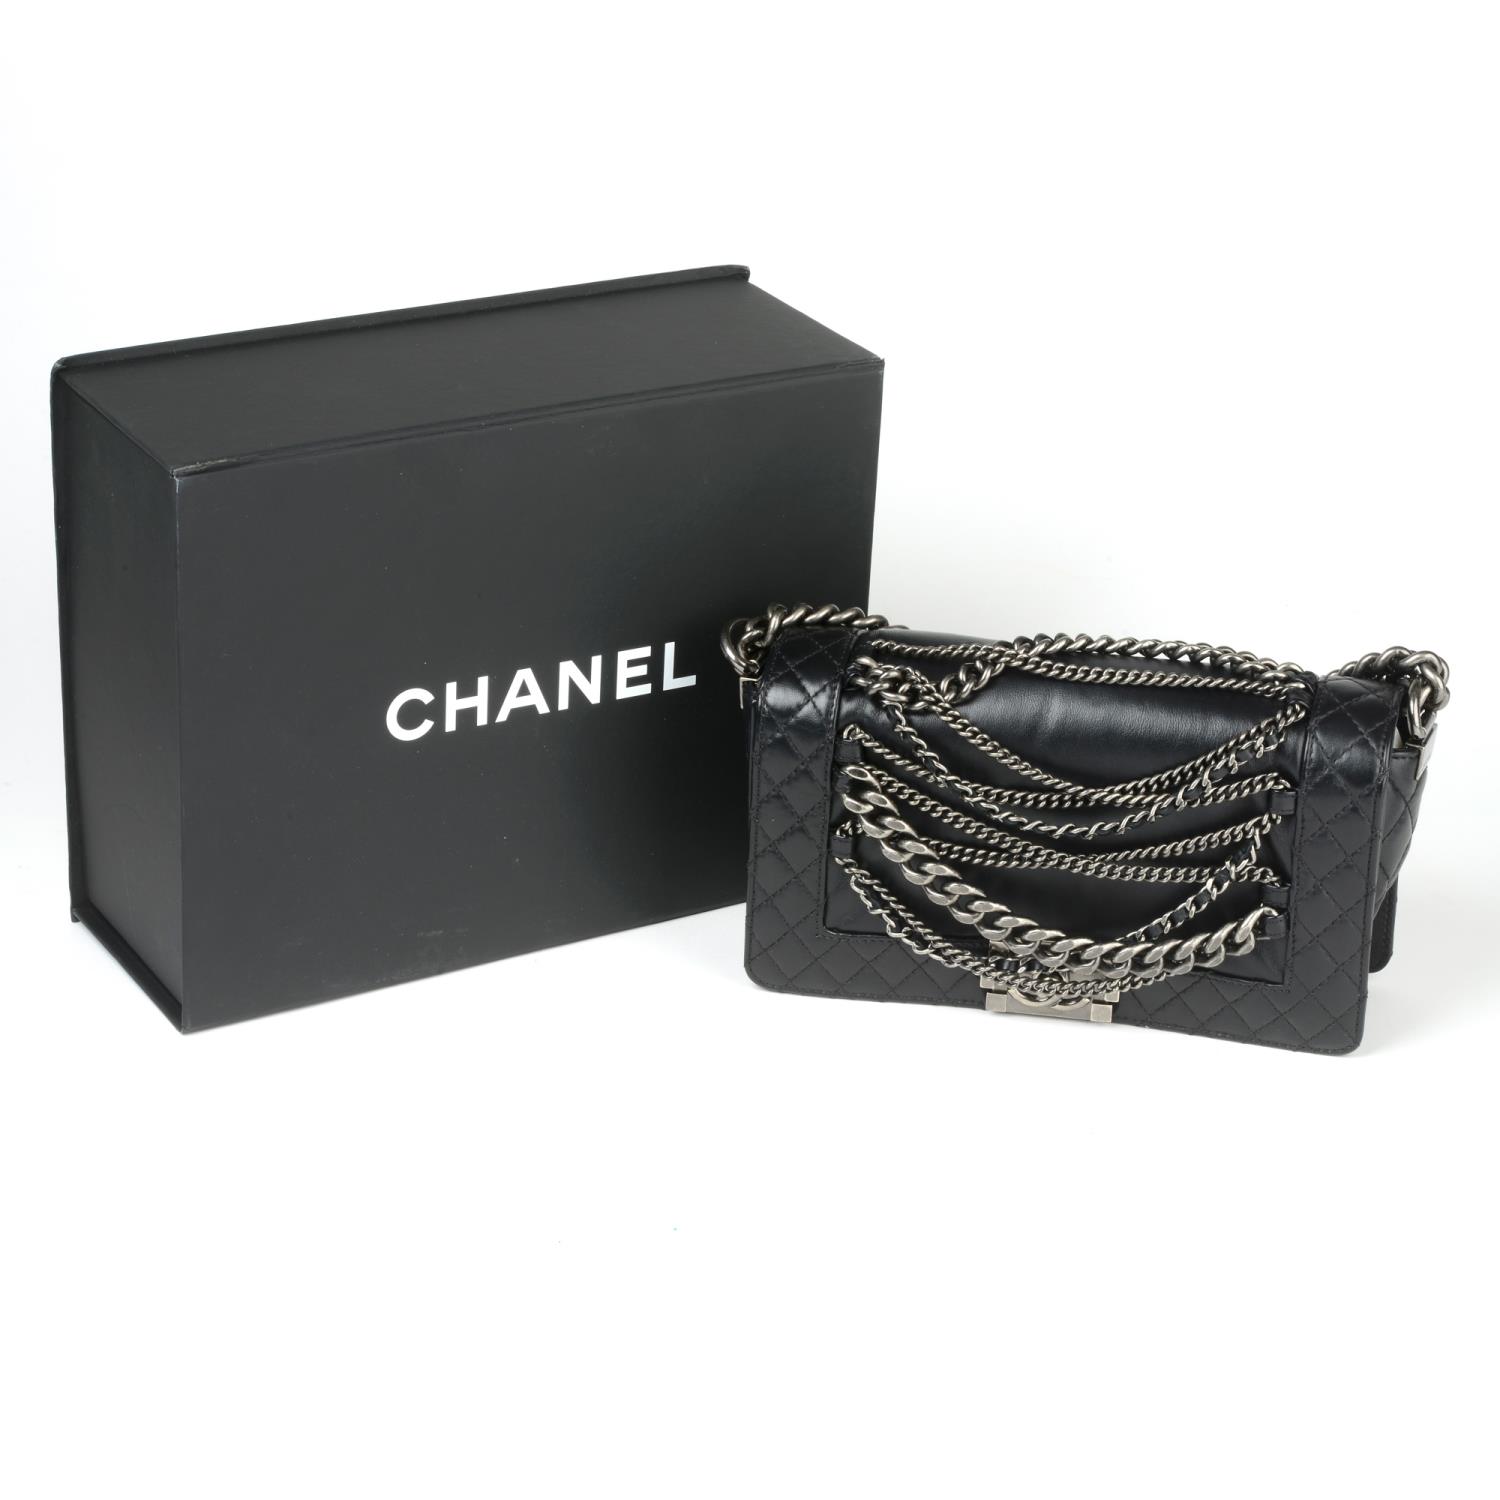 CHANEL - a Small Enchained Boy Flap handbag. - Image 4 of 4